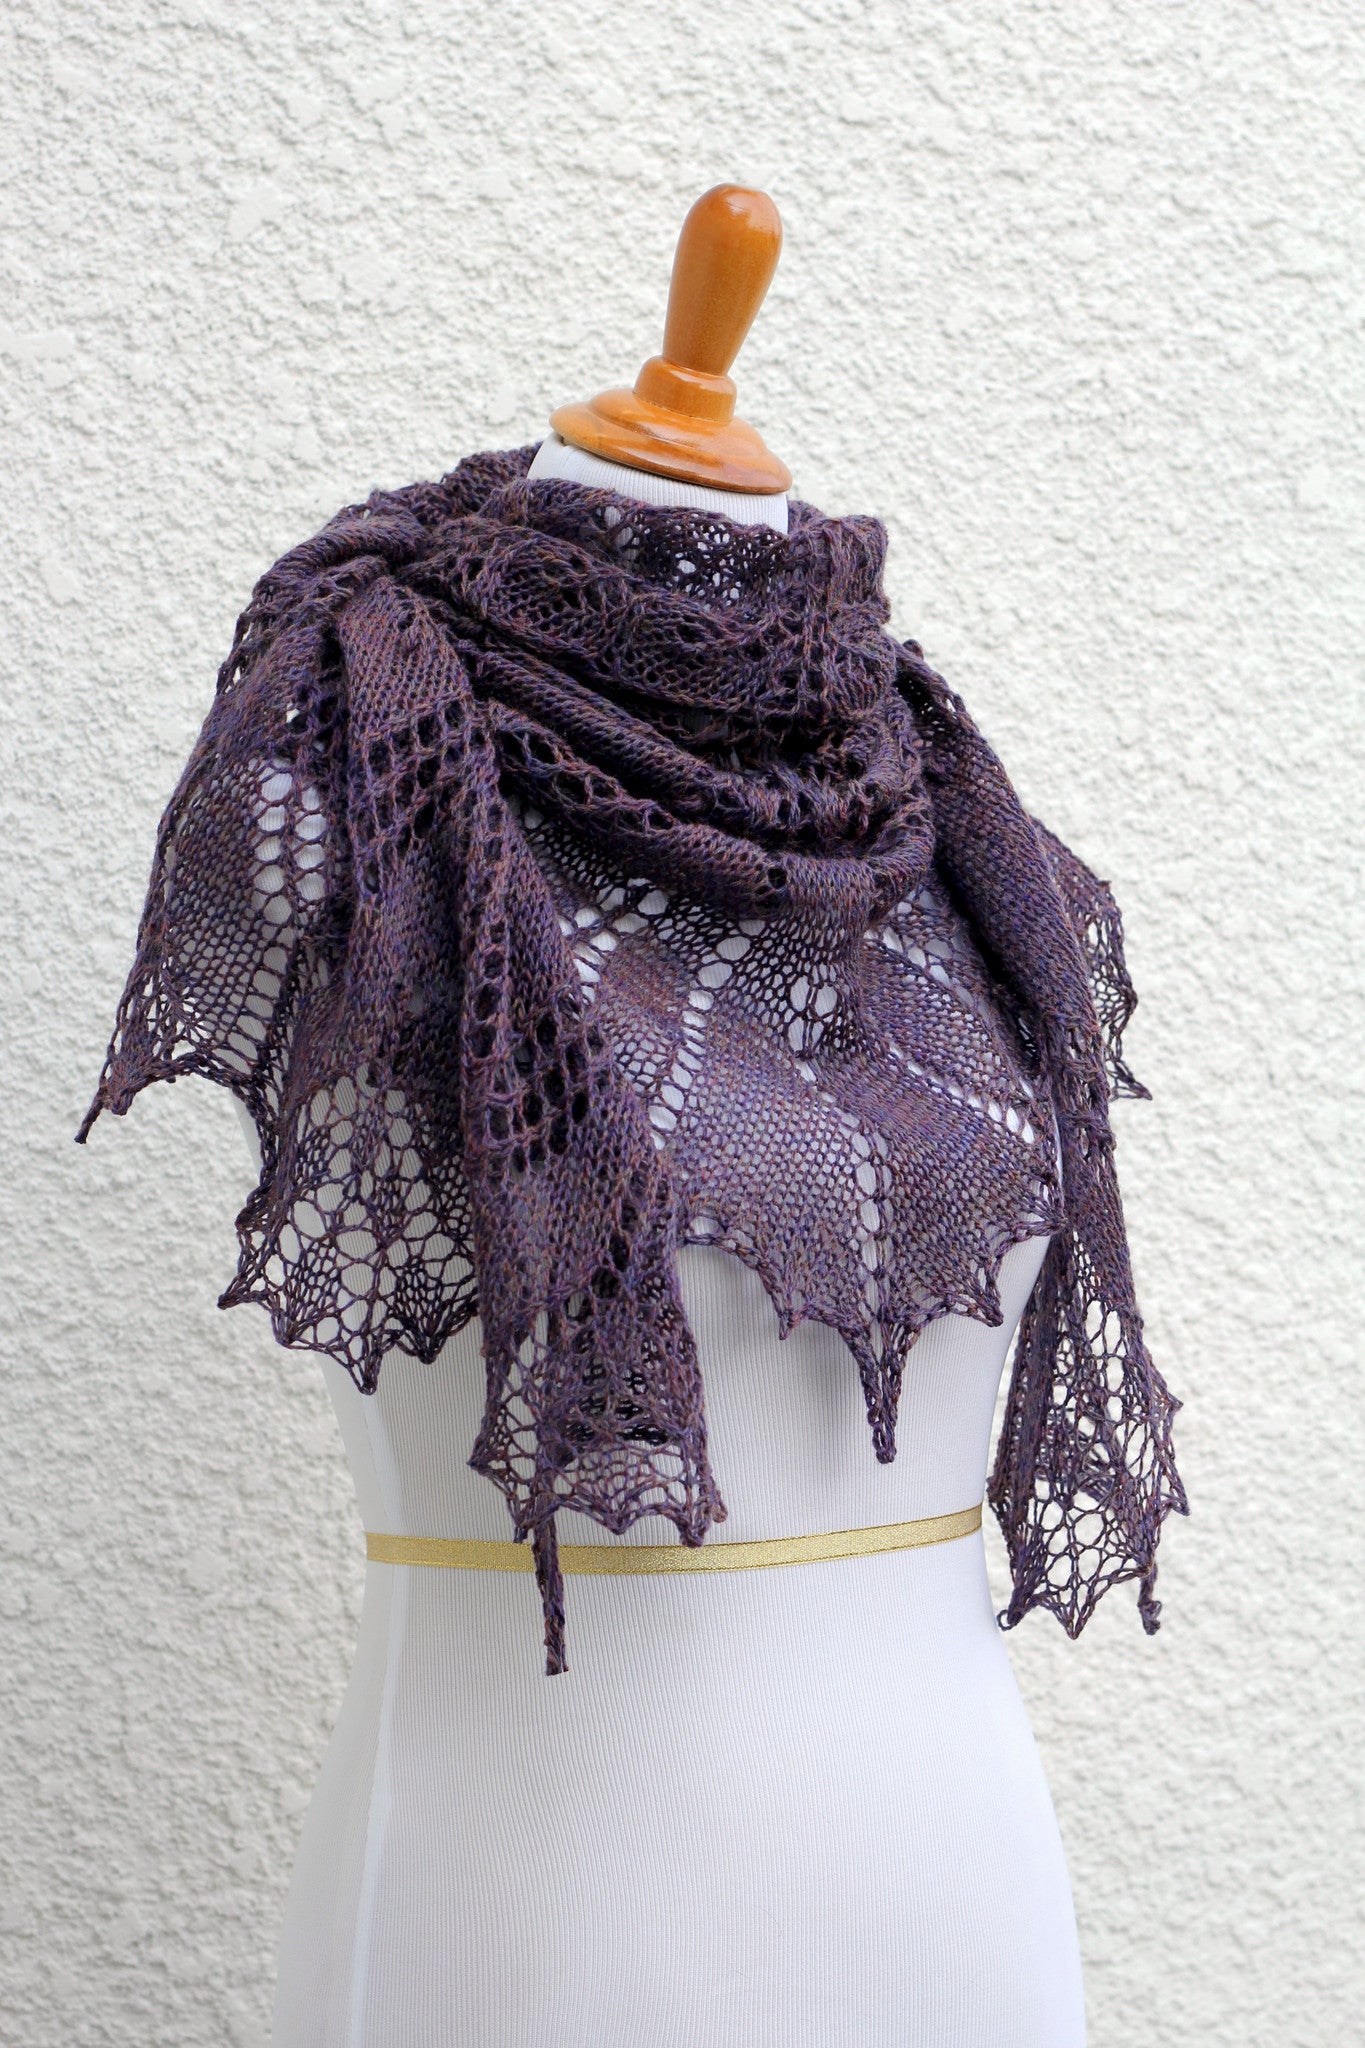 Knit shawl with nupps in red violet color, gift for her